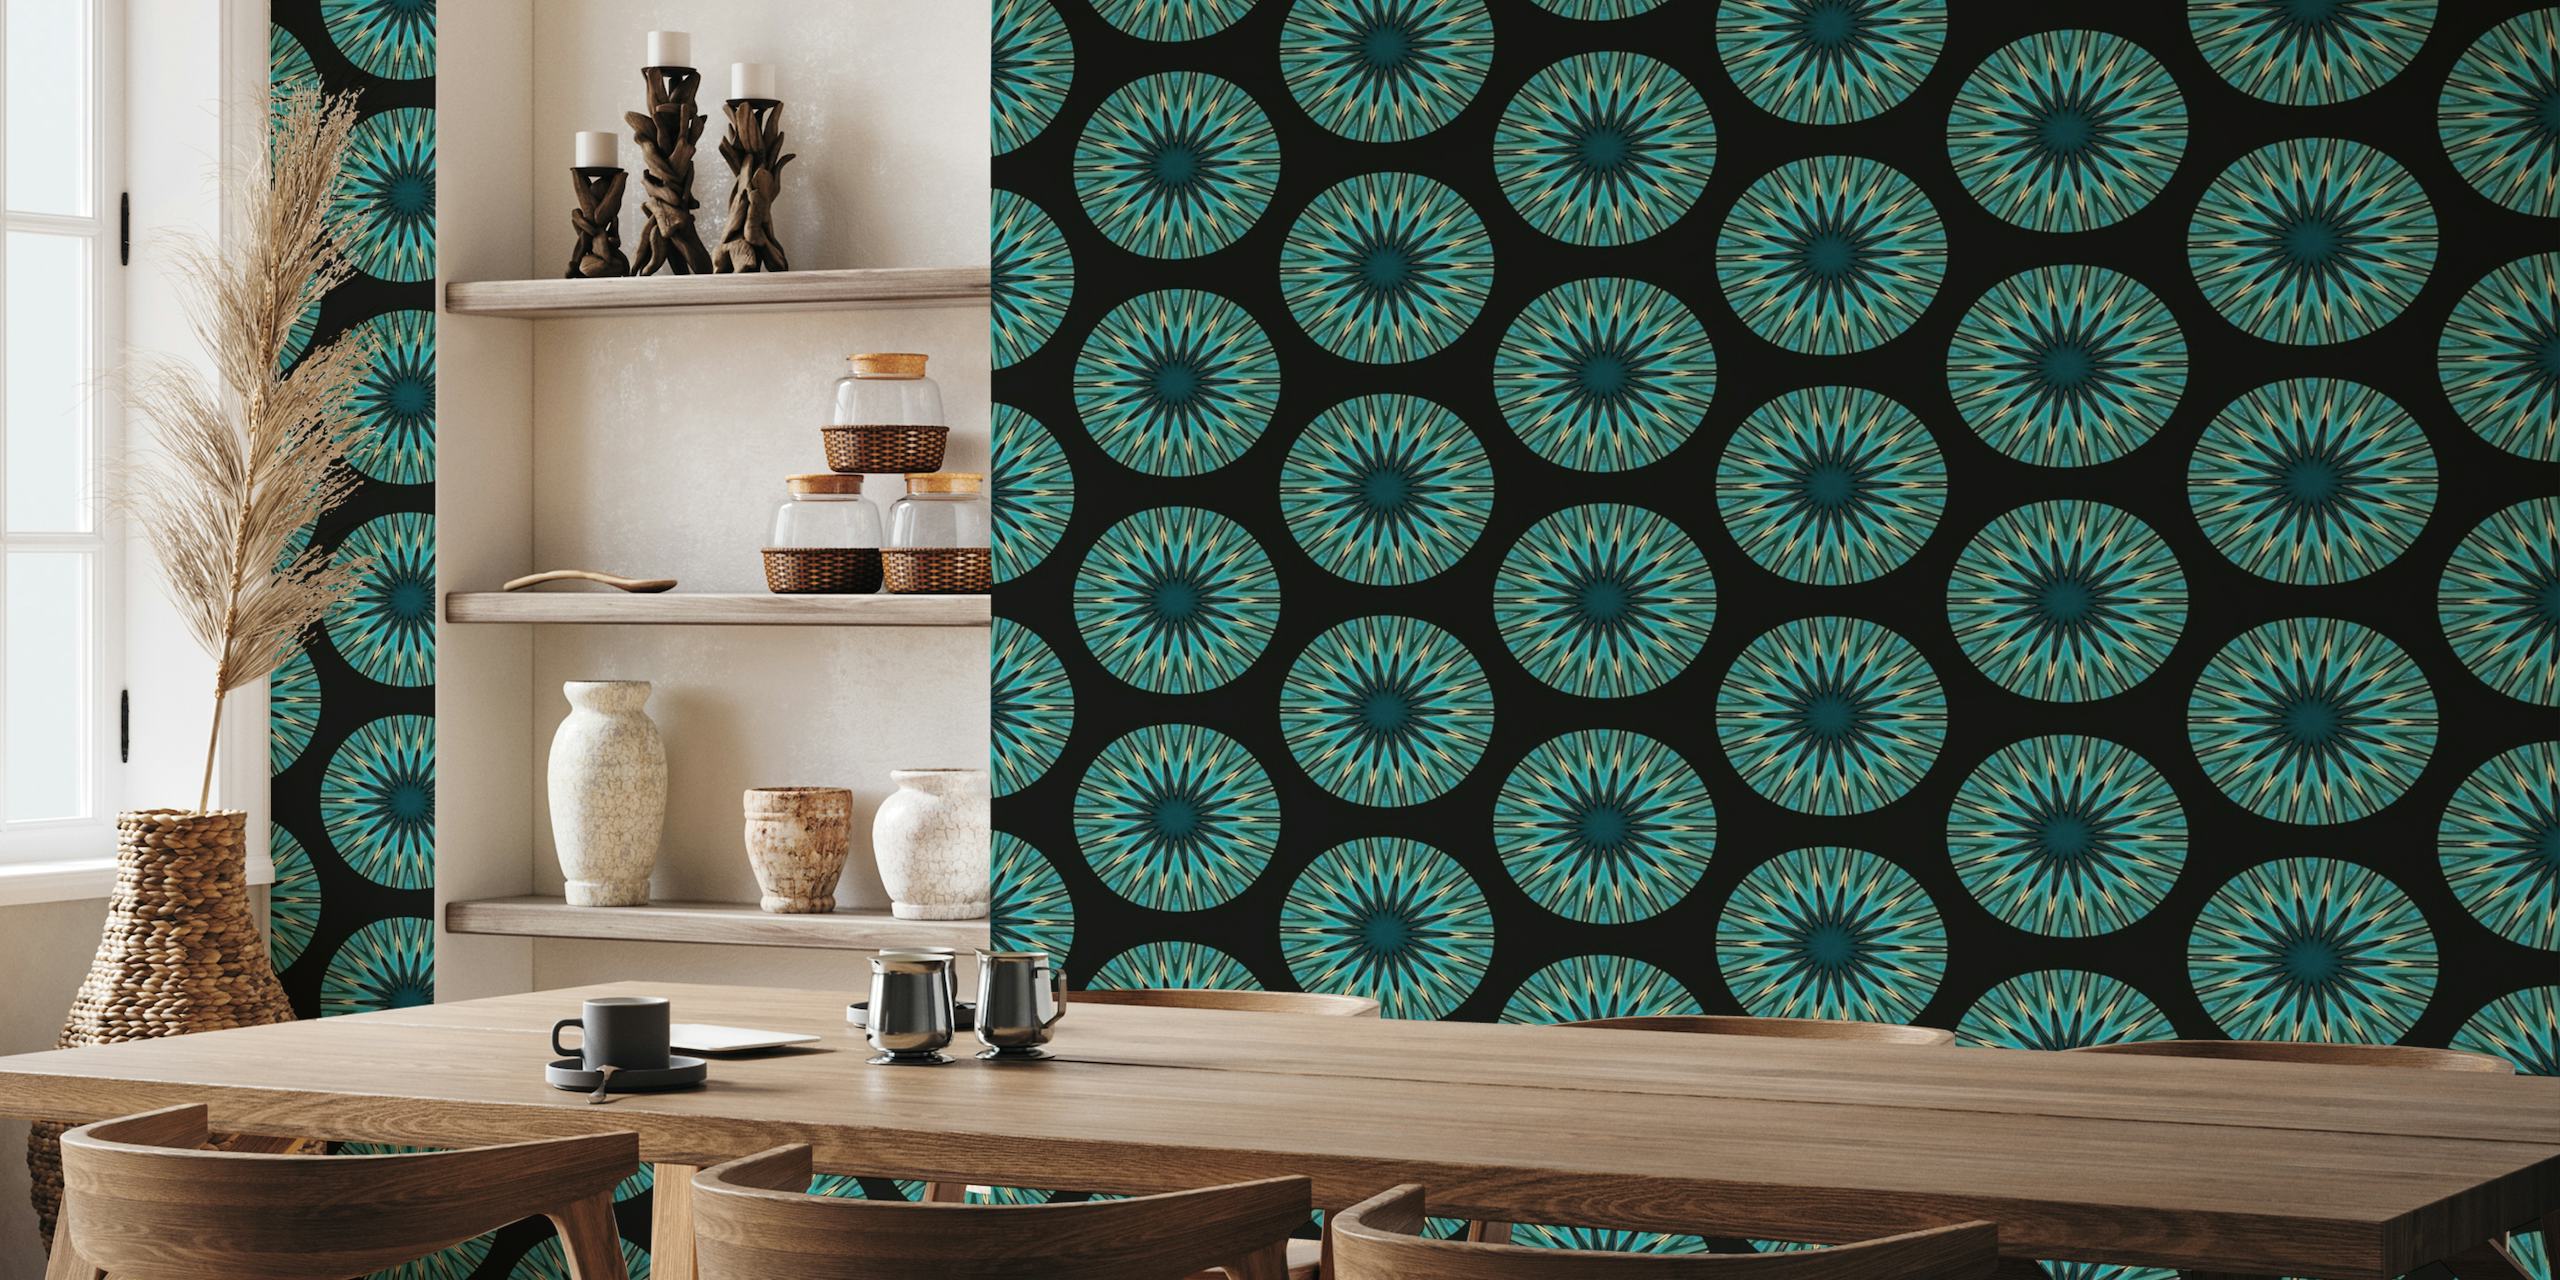 Oriental Round Mediterranean Tiles pattern in teal and gold for wall mural